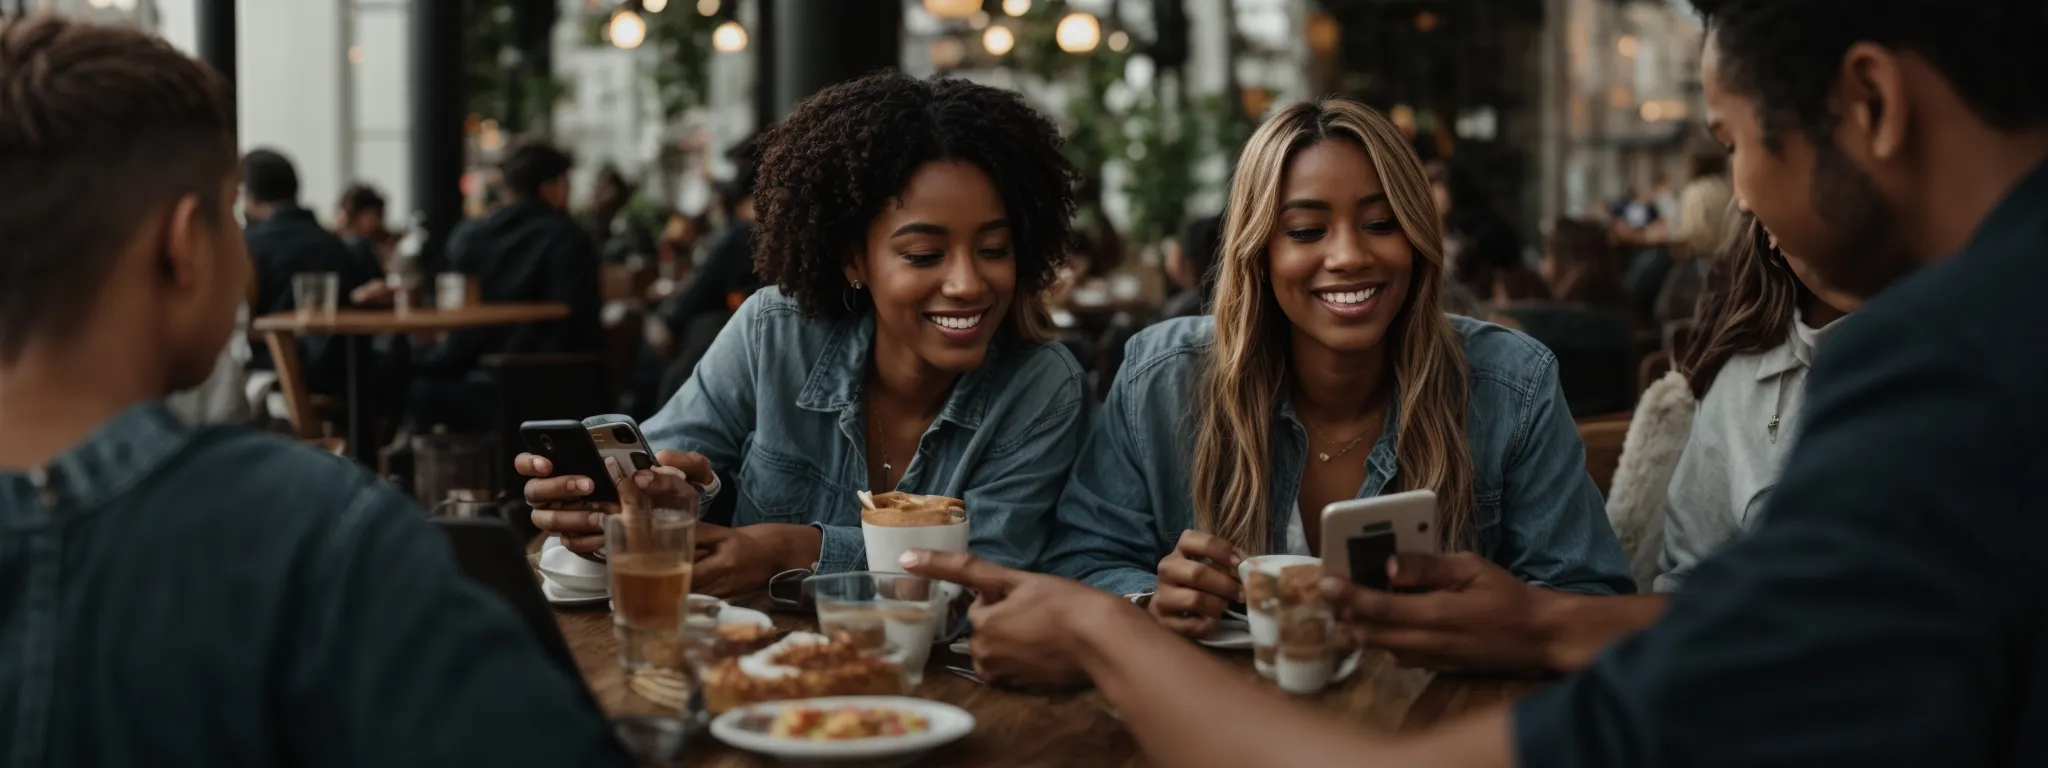 a group of satisfied customers is seen sharing their positive shopping experiences on their smartphones while sitting together in a trendy cafe.